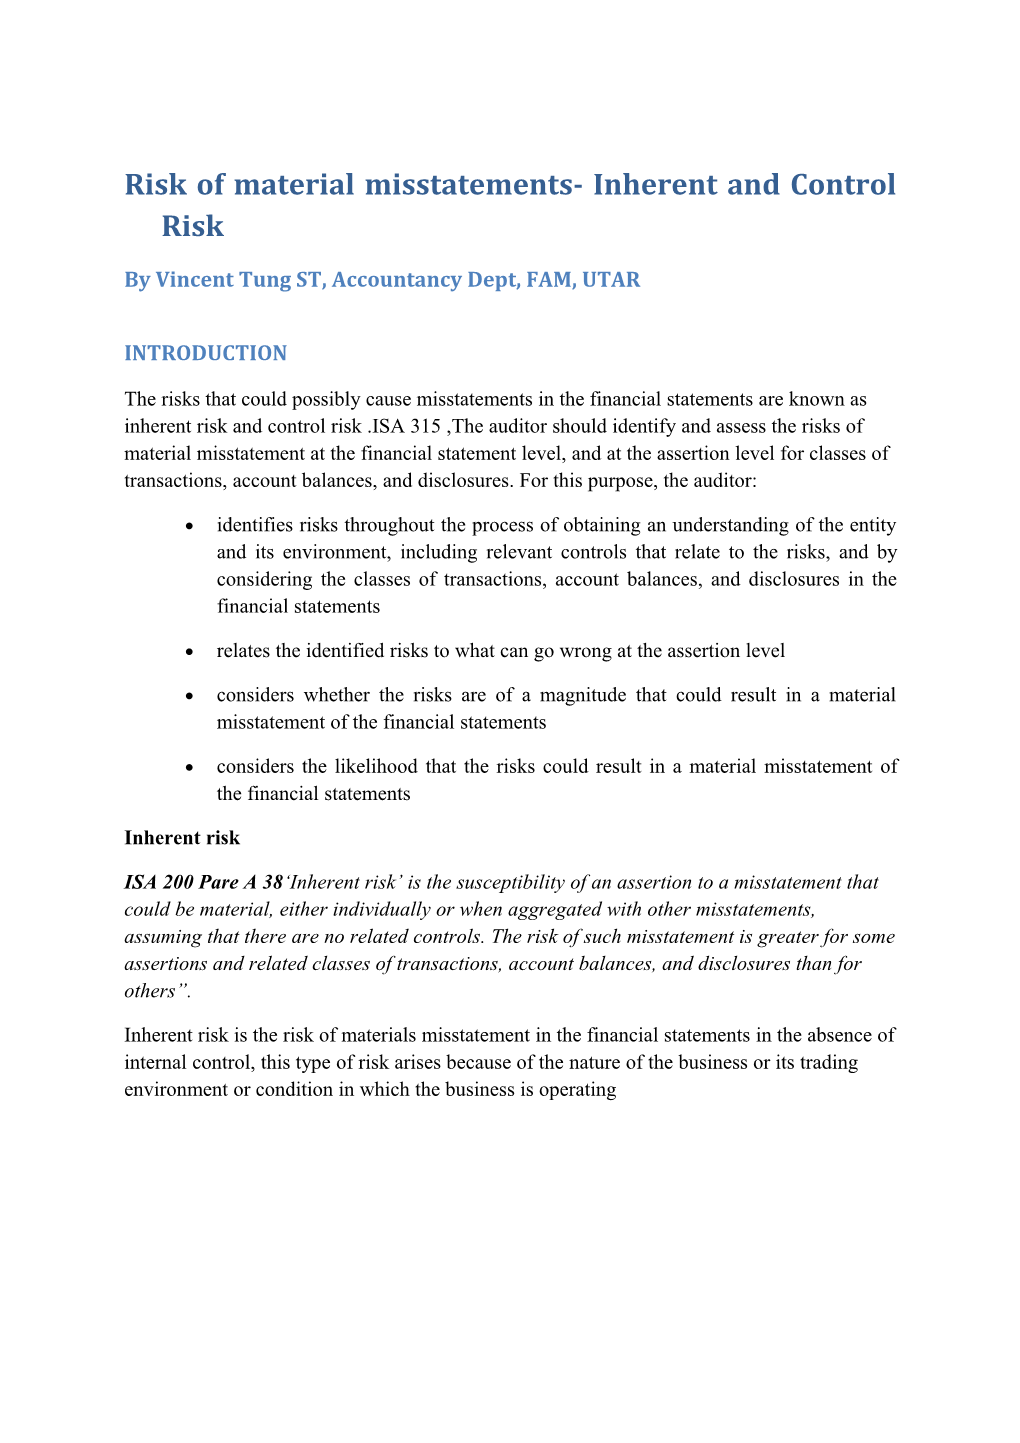 Risk of Material Misstatements- Inherent and Control Risk